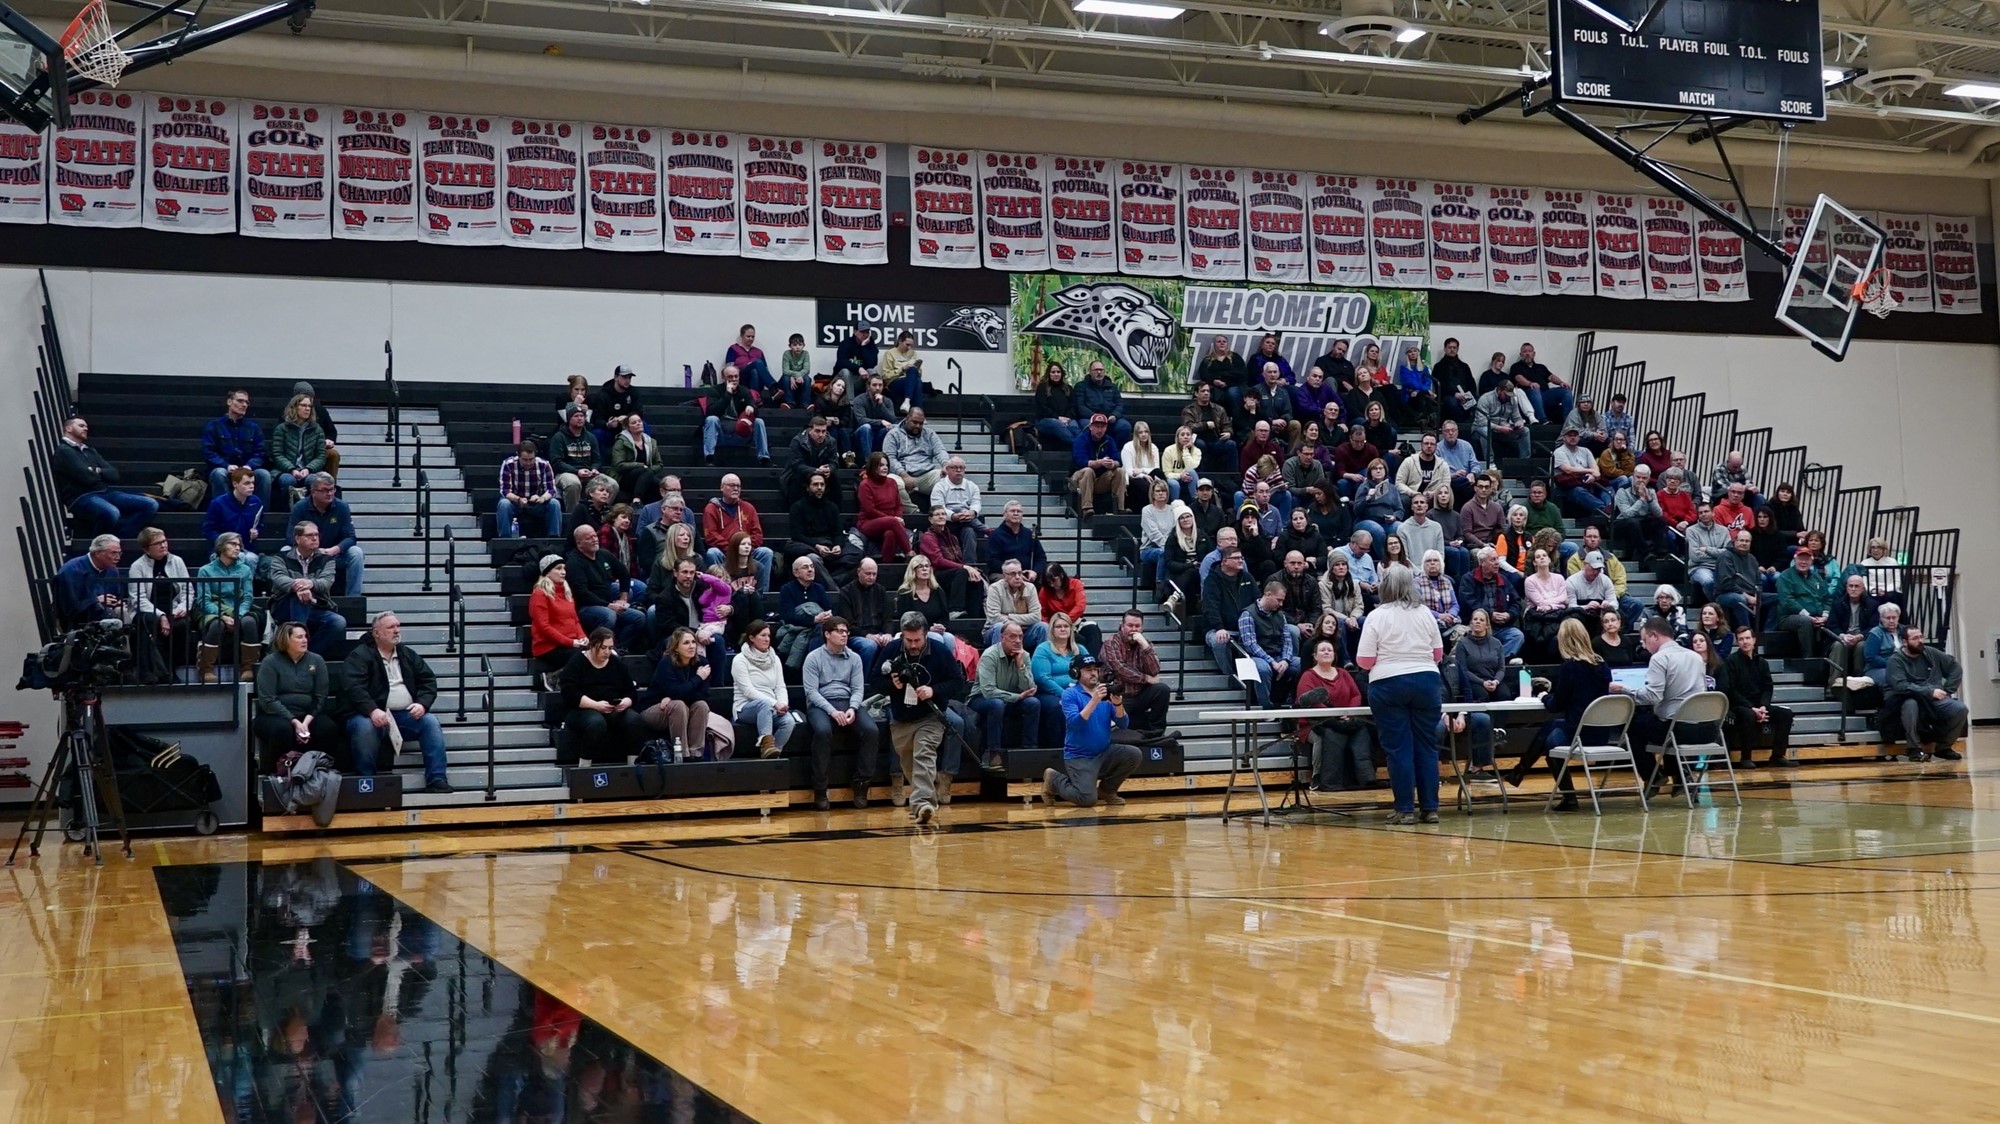 People sit in the stands at an indoor basketball court.